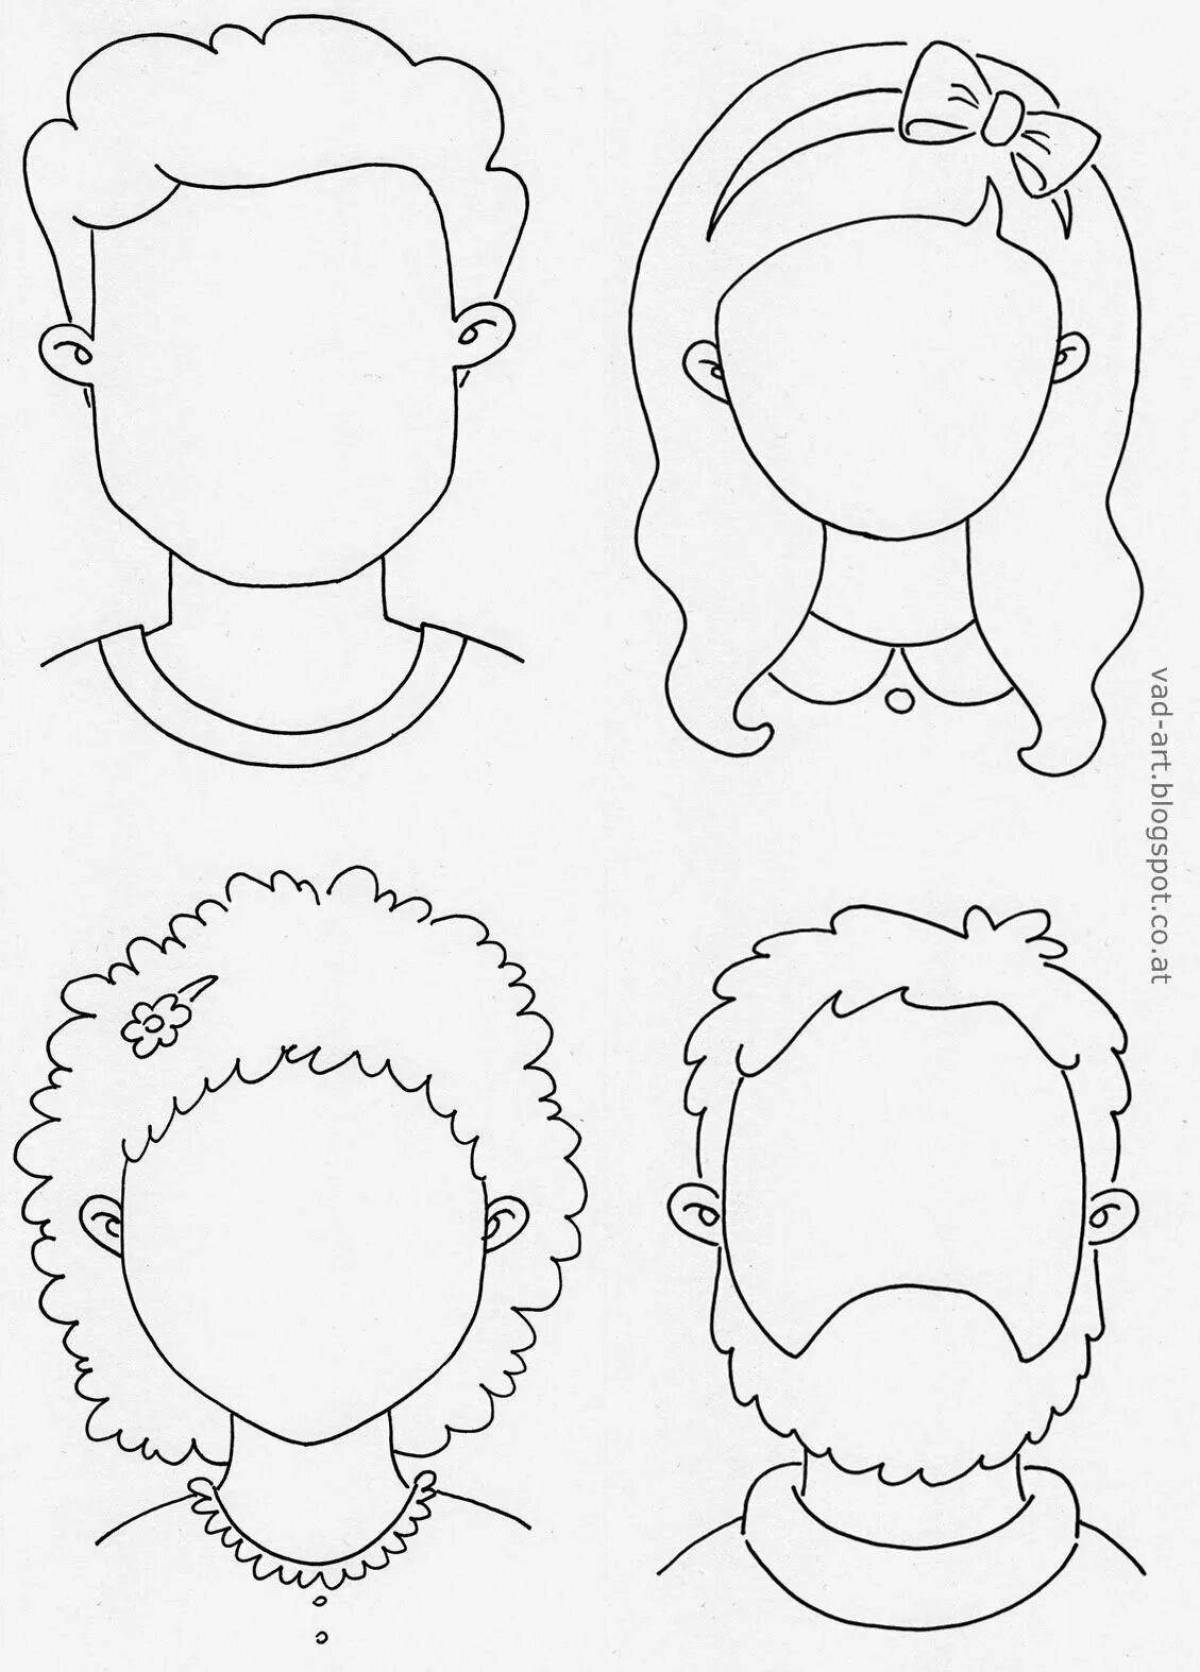 Fun face drawing for kids